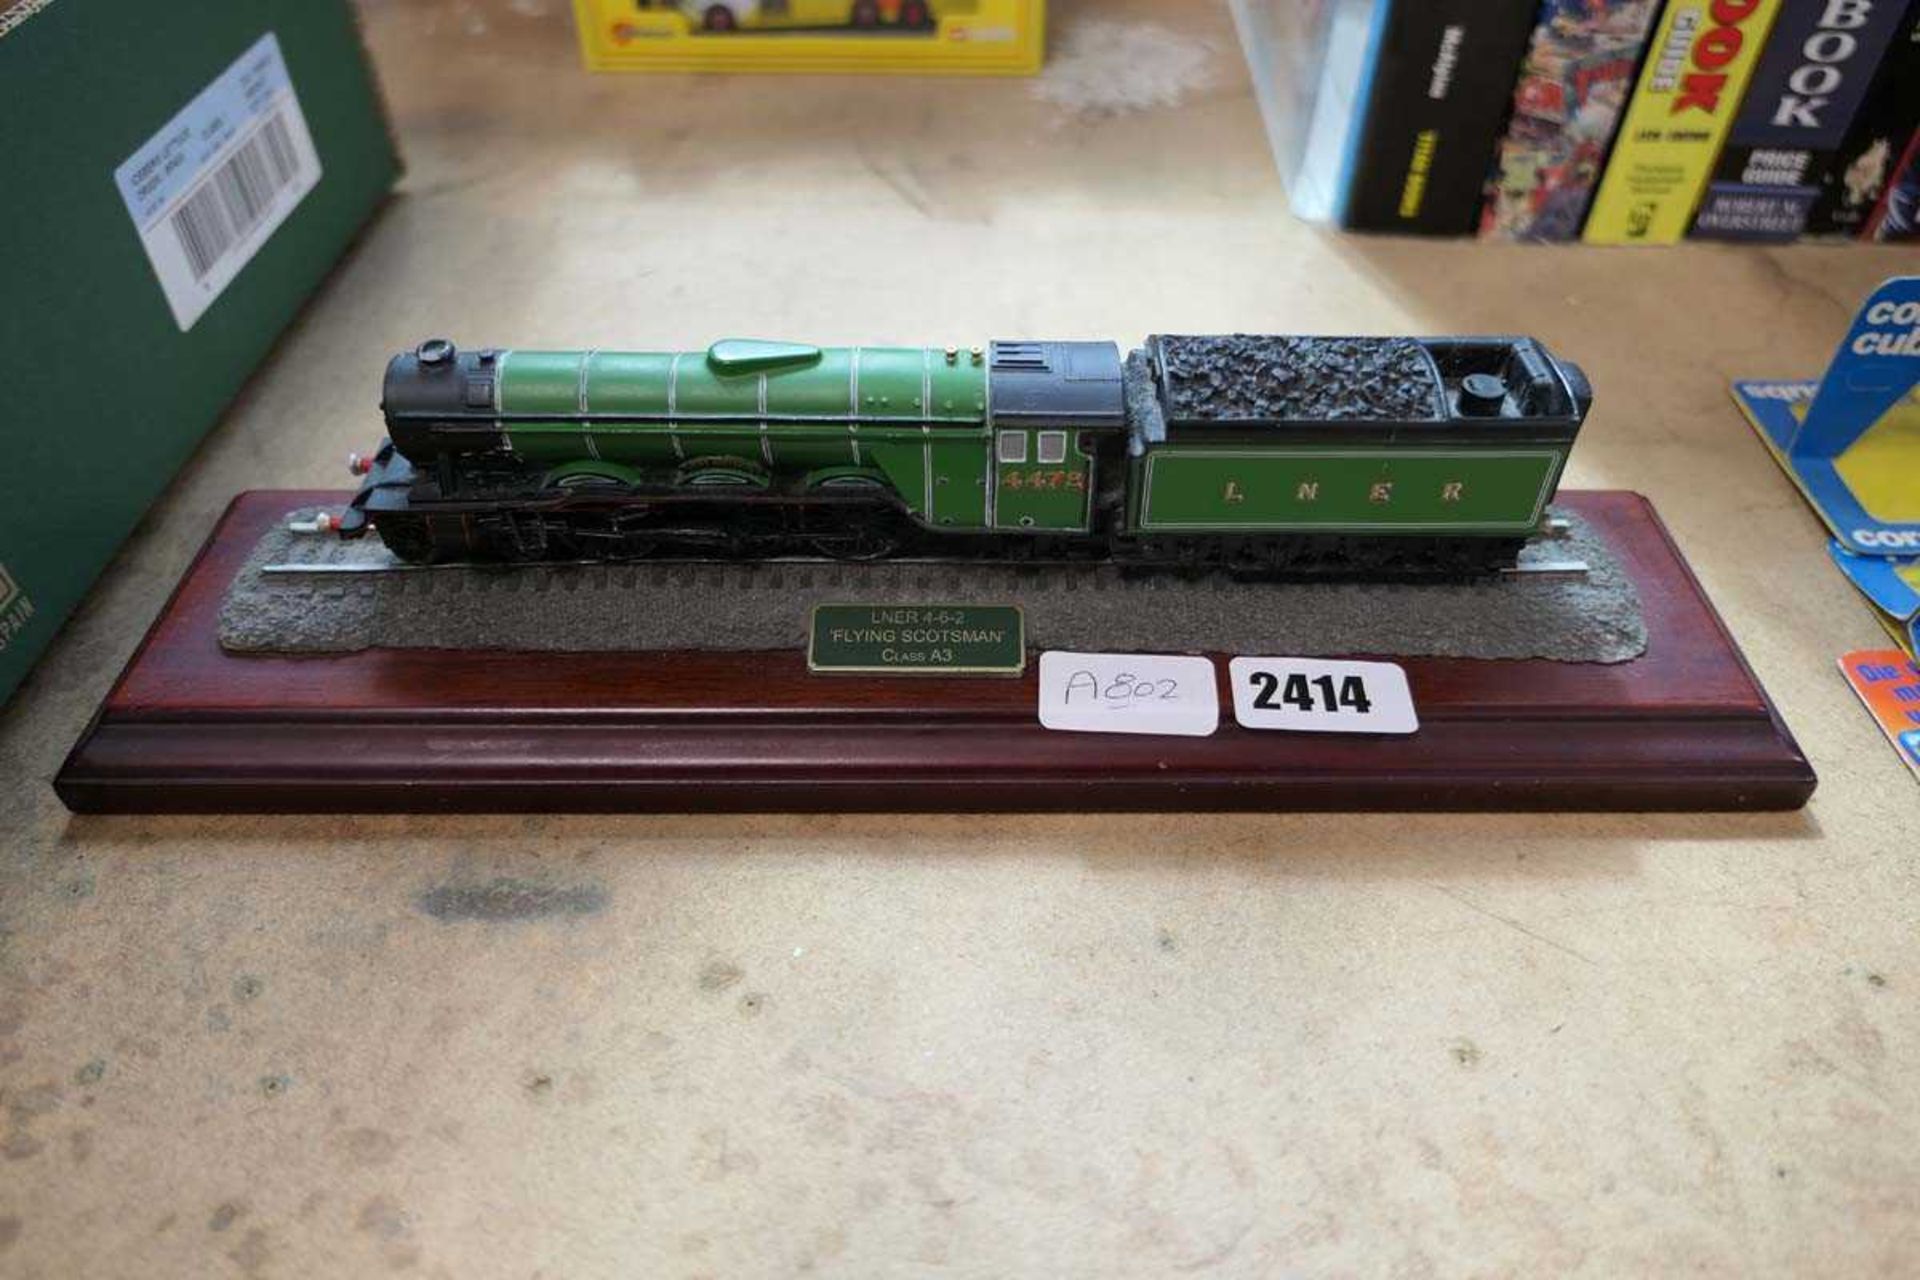 A static model HO gauge model of the LNER 462 Flying Scotsman Class A3 train on stand